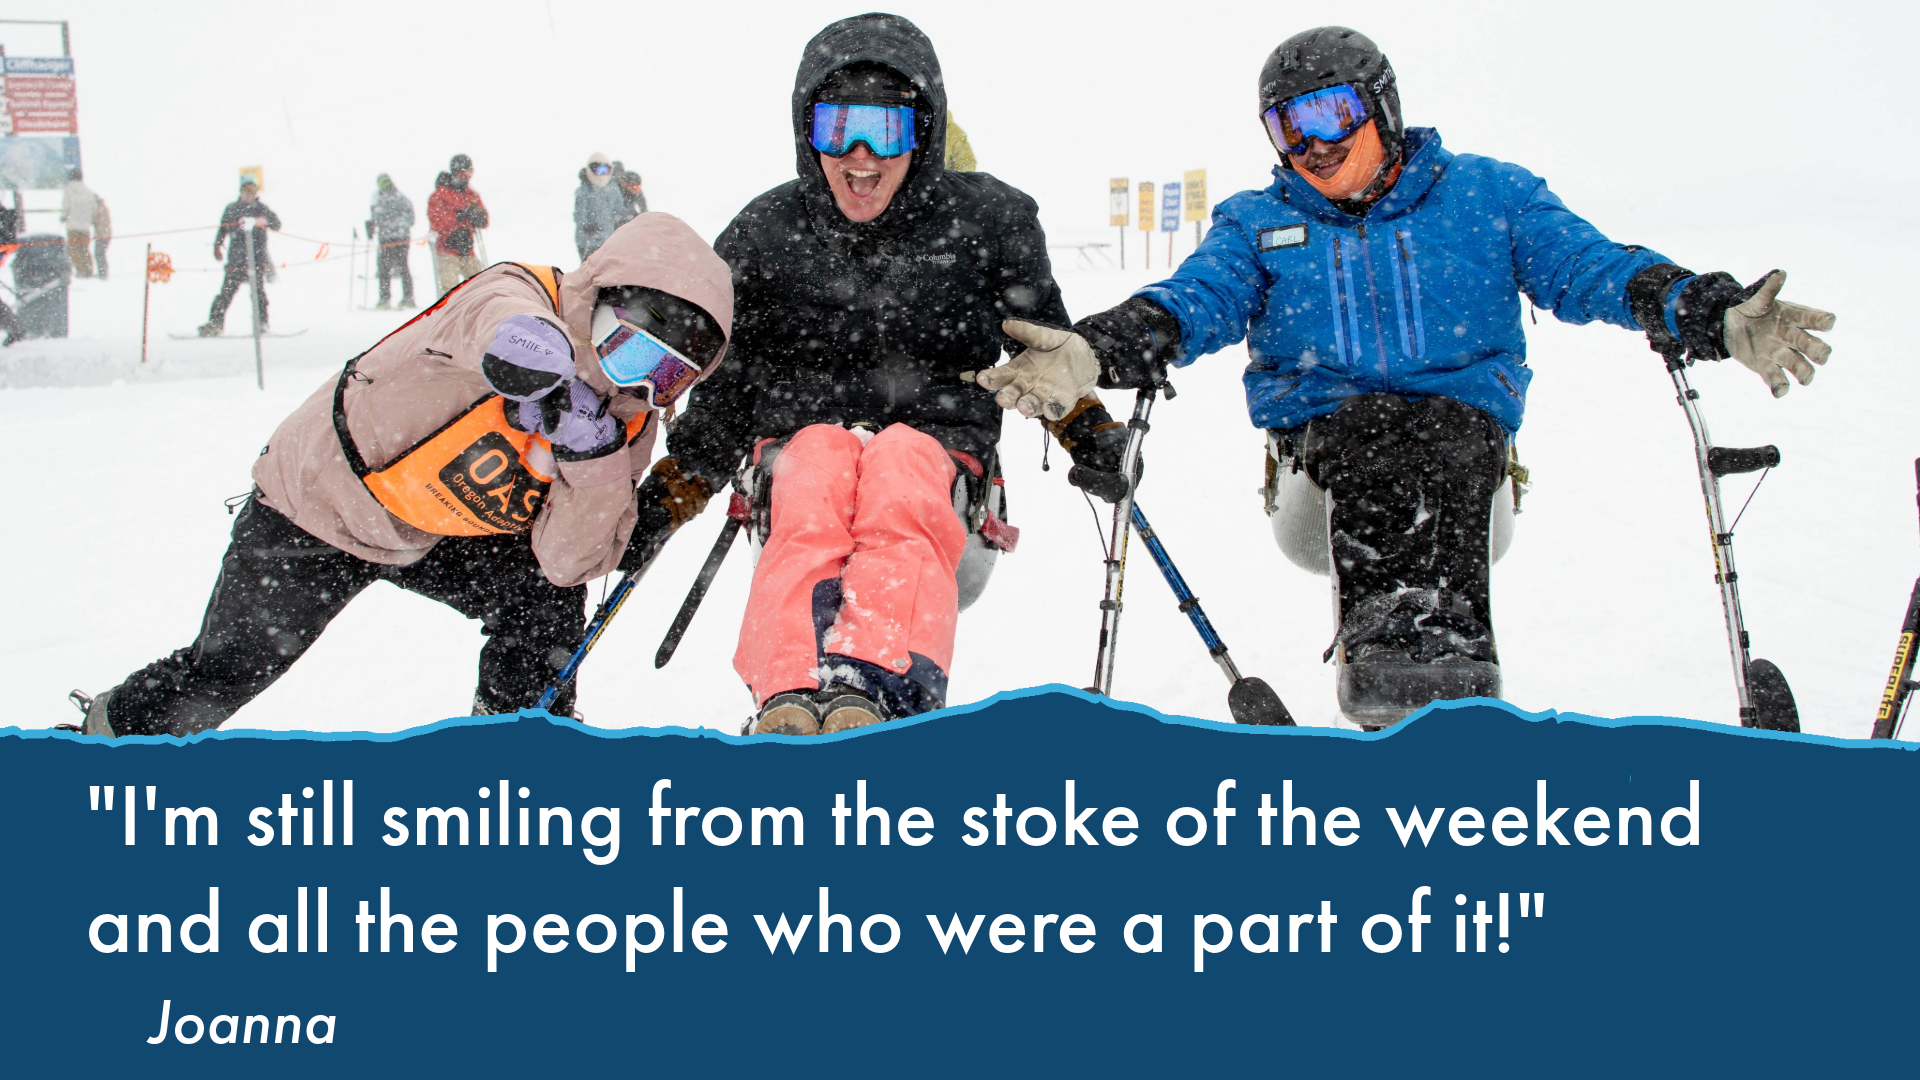 text: "I'm still smiling from the stoke of the weekend and all the people who were a part of it!" image features Joanna in the center in pink snowpants, snow gear in a sit-ski with another sit-skier to her right and a volunteer in 2-track skis to her left. snowy blizzard conditions outside at the base of a ski lift.